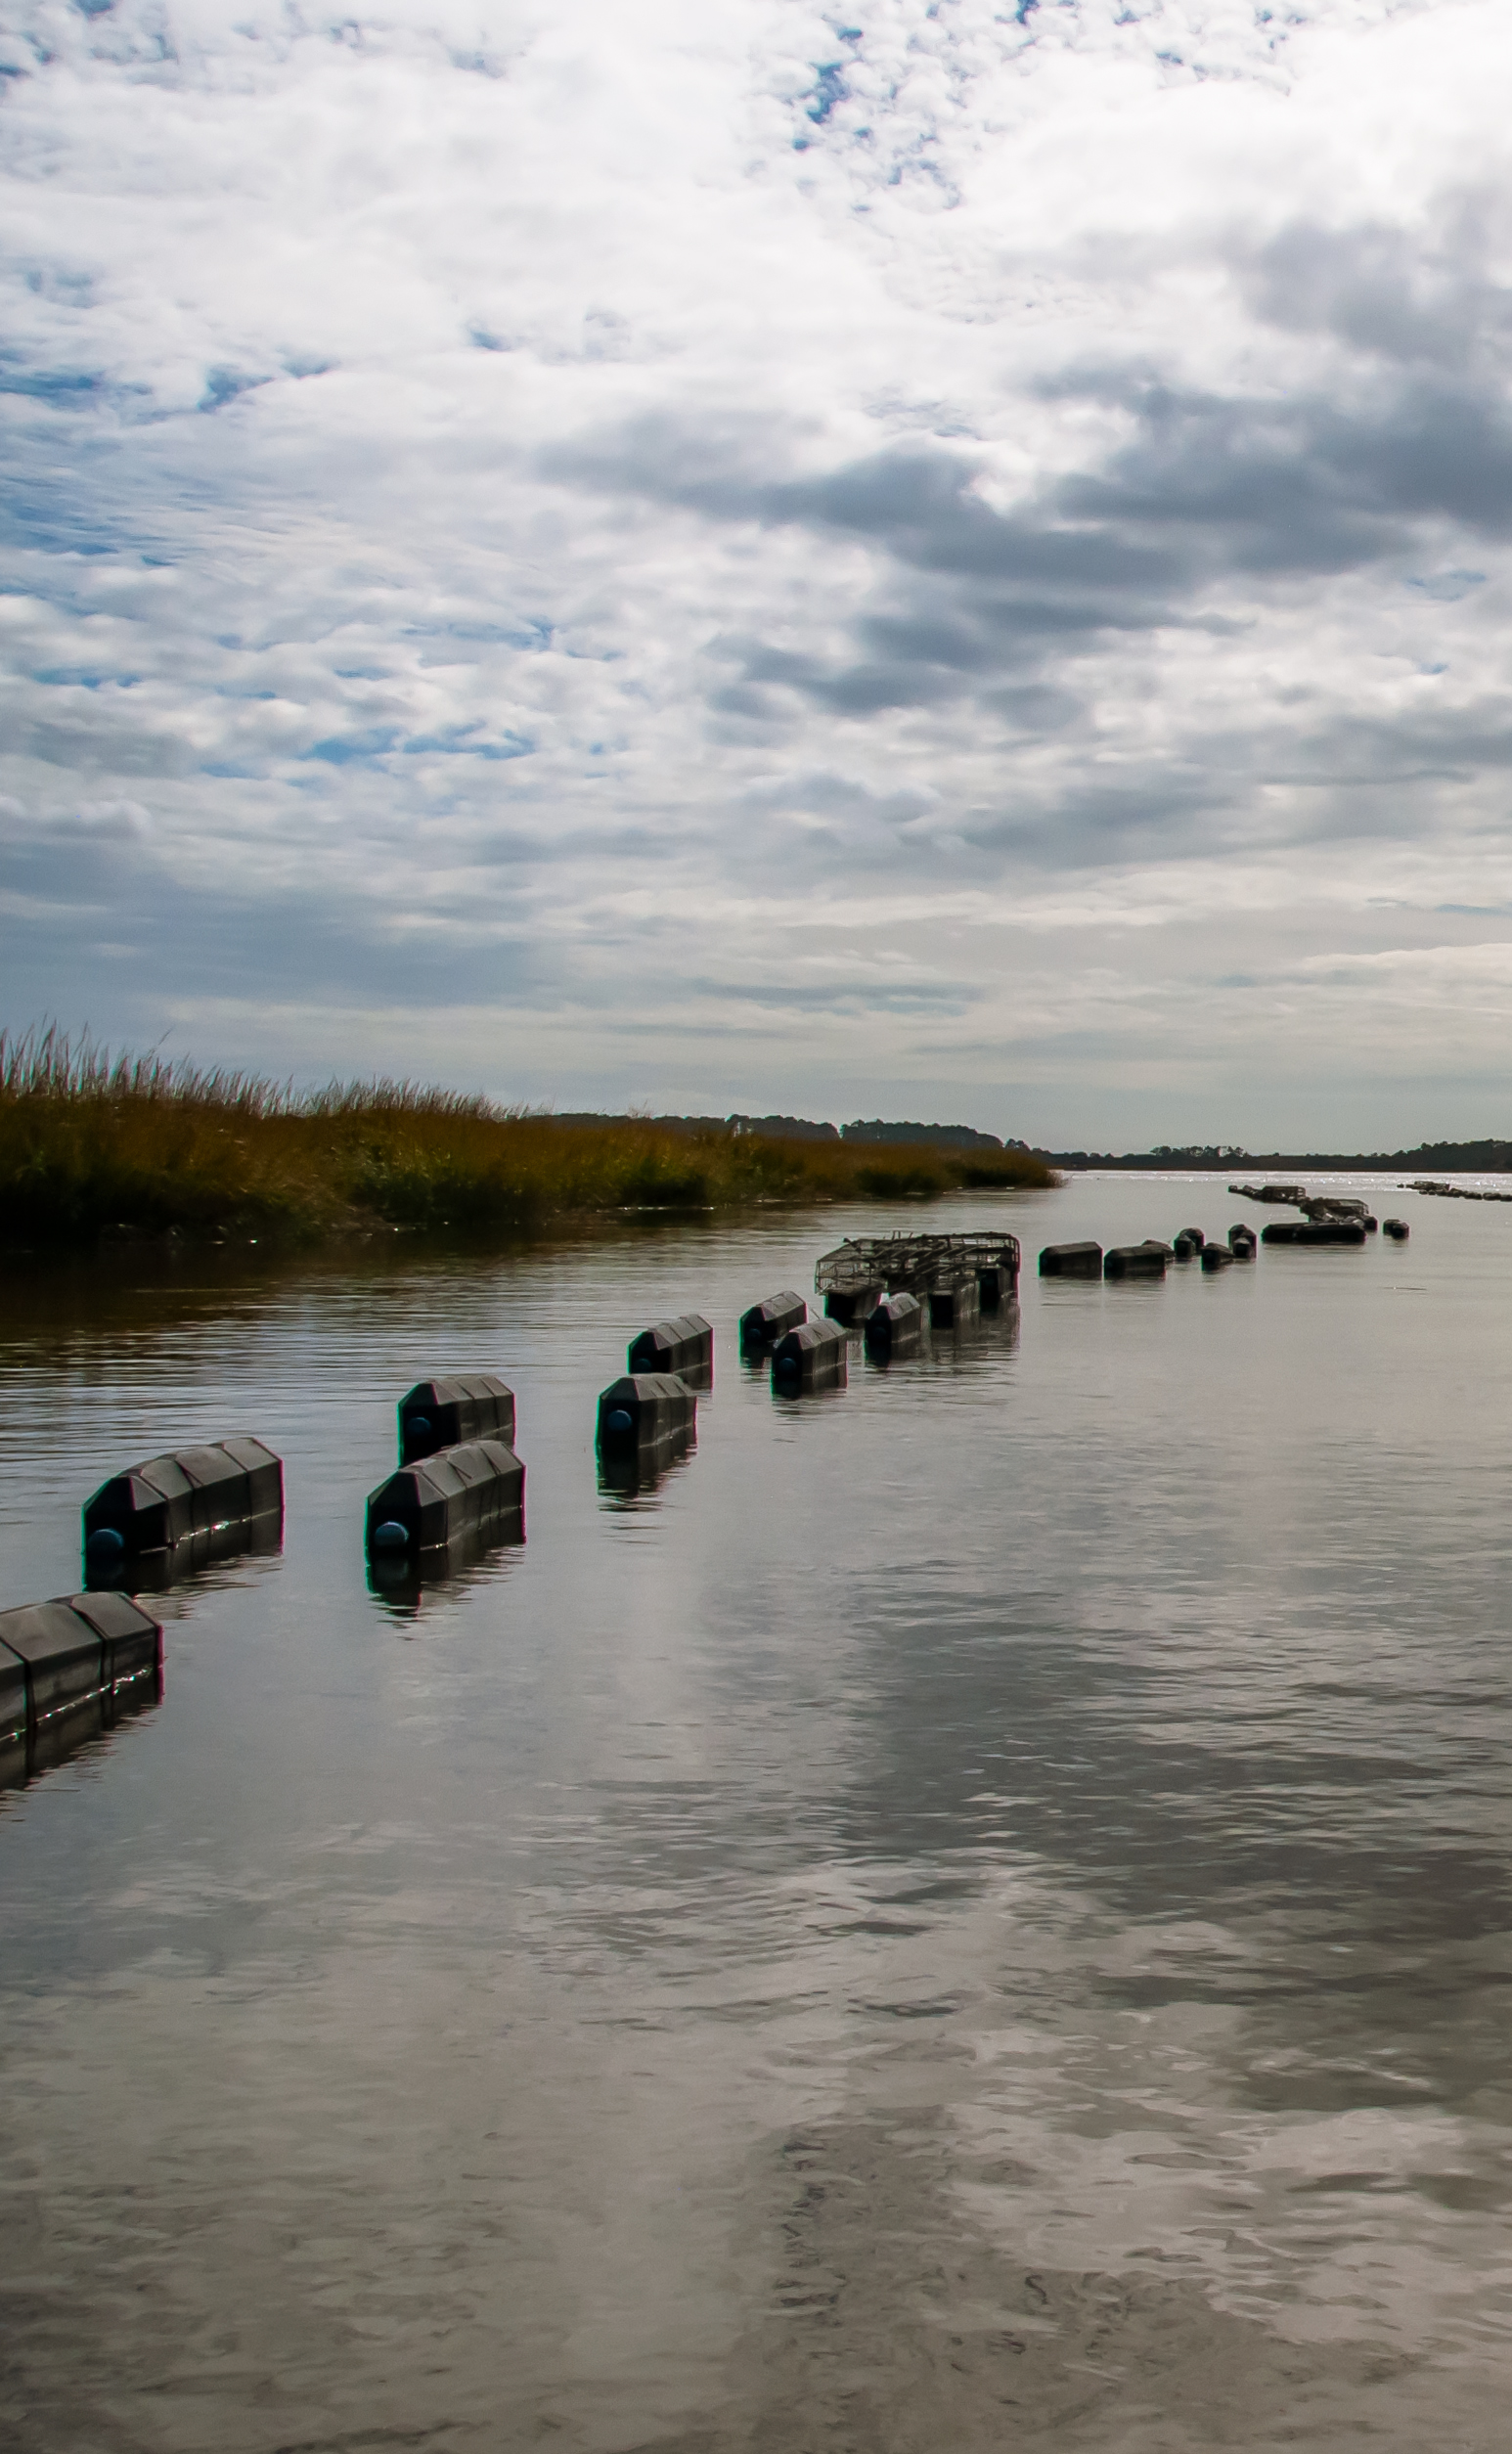 A row of floating oyster cages in a tidal creek.